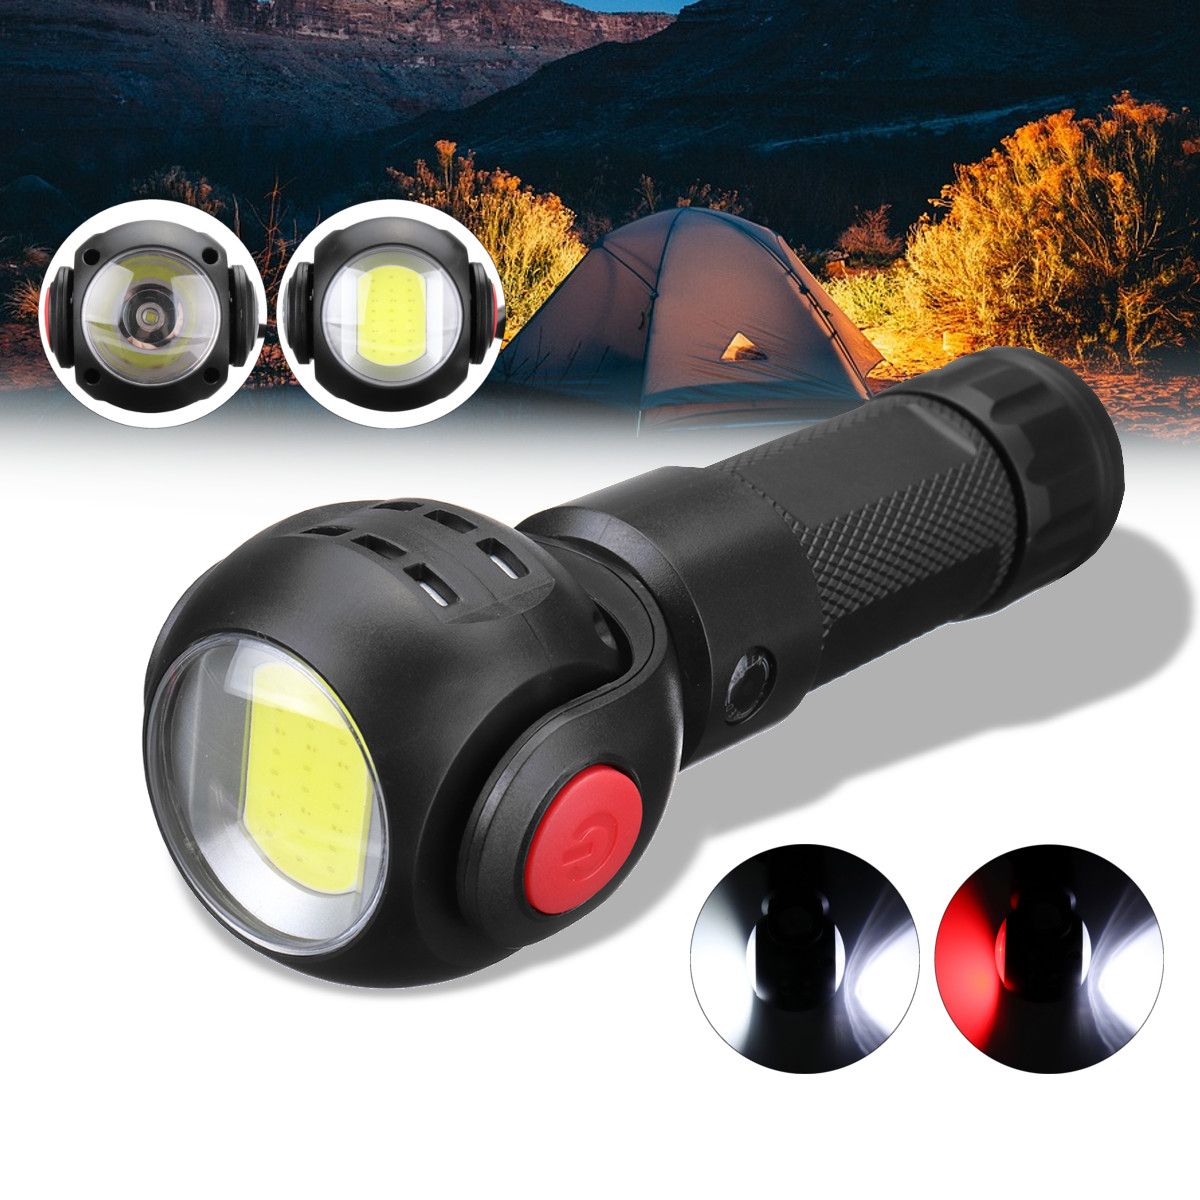 Rechargeable-T6COB-LED-Work-Light-Magnetic-Torch-Flashlight-USB-Lamp18650-1584599